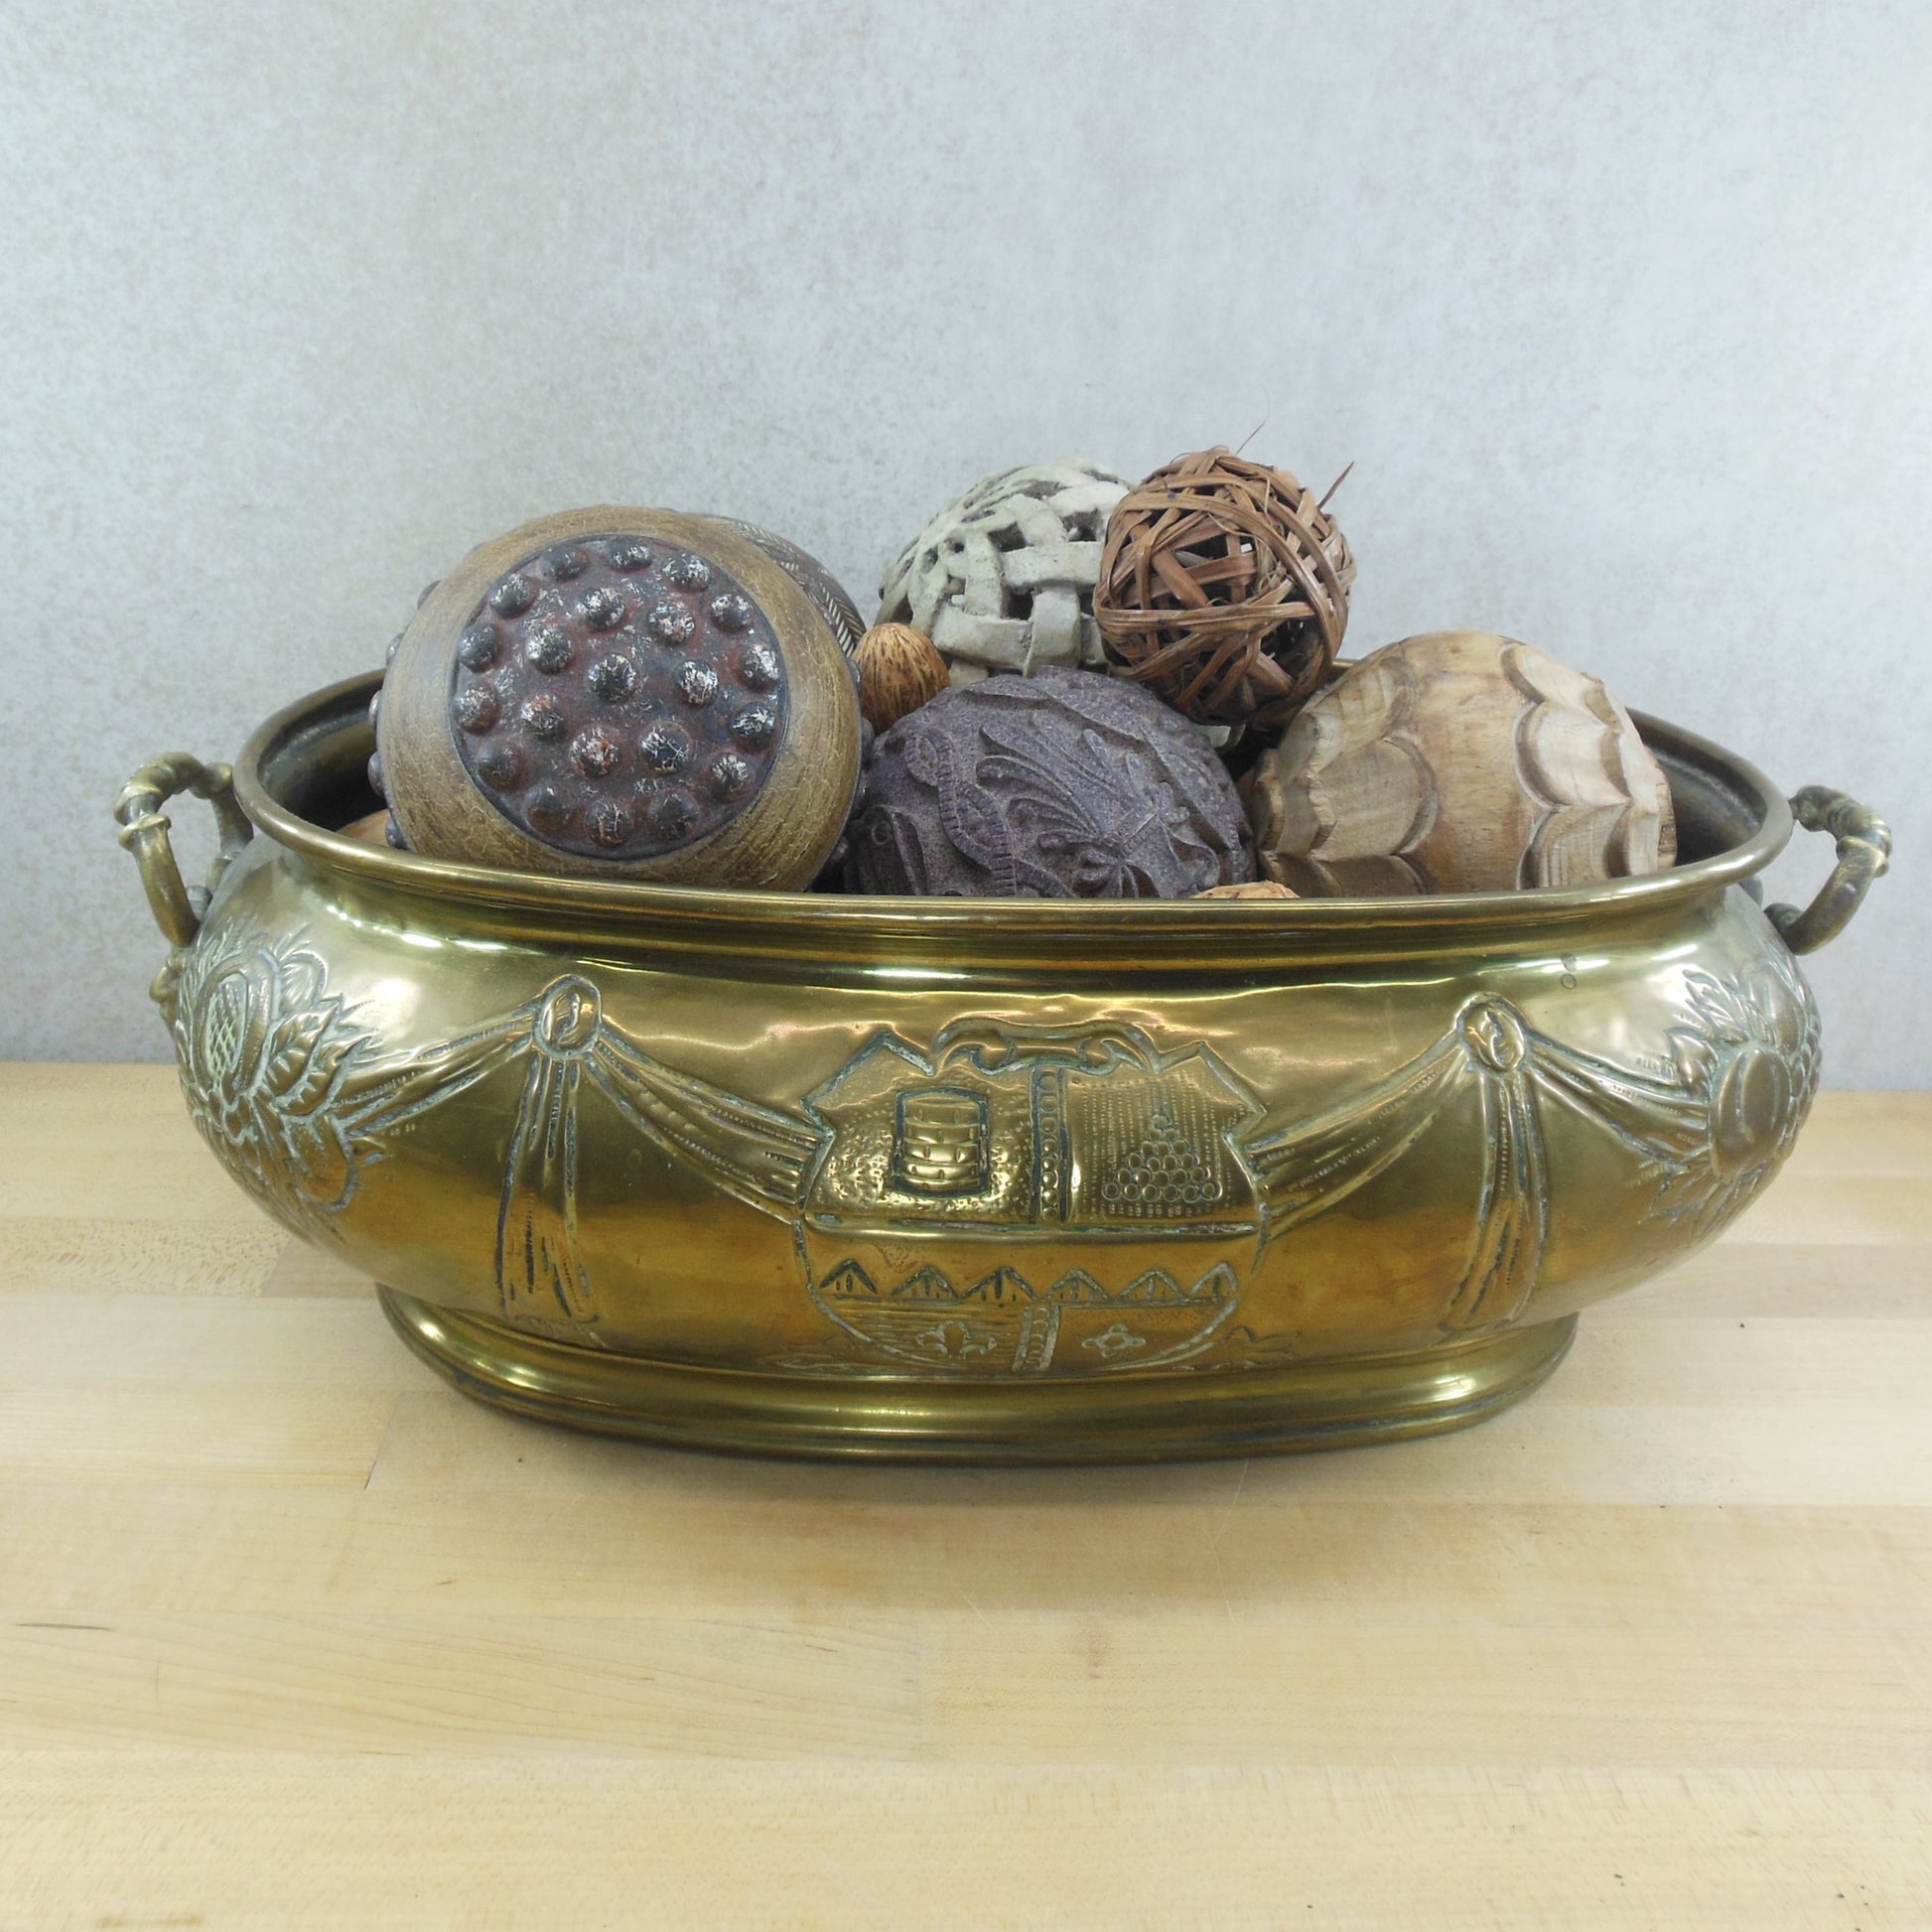 Antique English Repousse Brass Oval Planter Jardiniere & Carved Balls Seeds Gourds